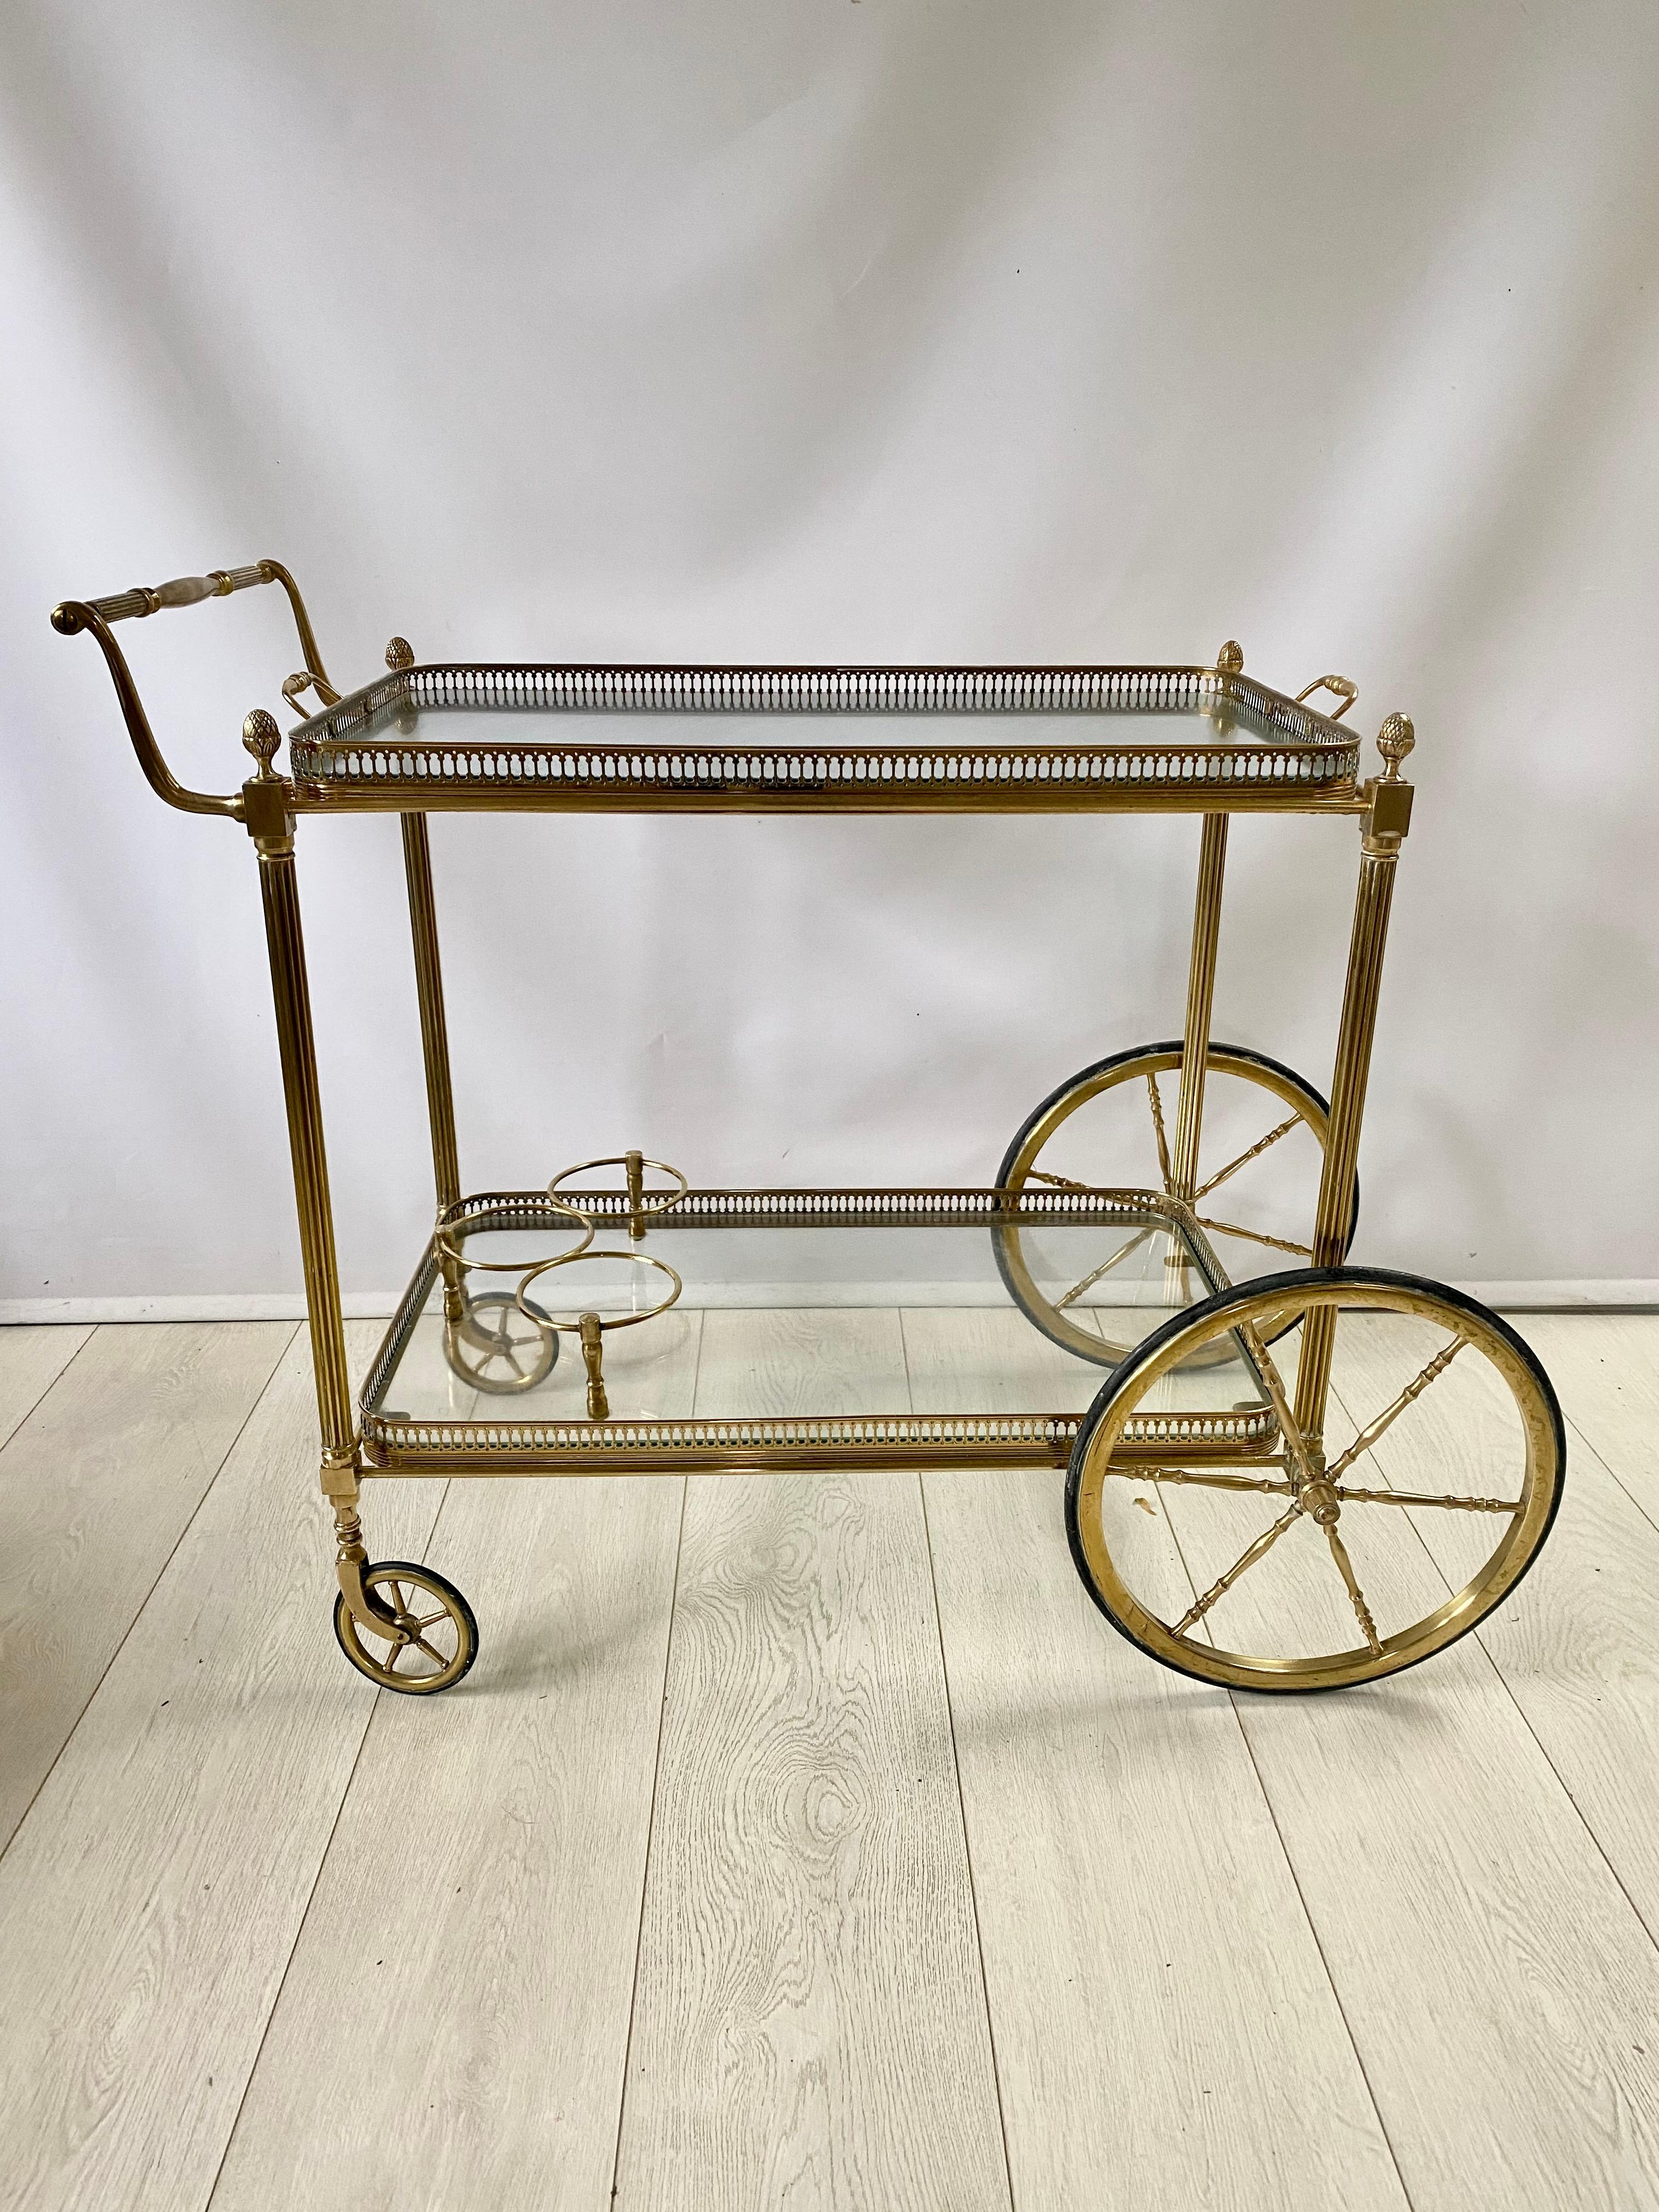 Quality French drinks trolley c1950

Generous in size with top tray measuring 62cm wide by 36.5cm deep, 60cm to glass.

Polished brass frame with lift off top tray and bottle holder to lower tray.

Overall dims 90 cm wide, 50 cm deep and